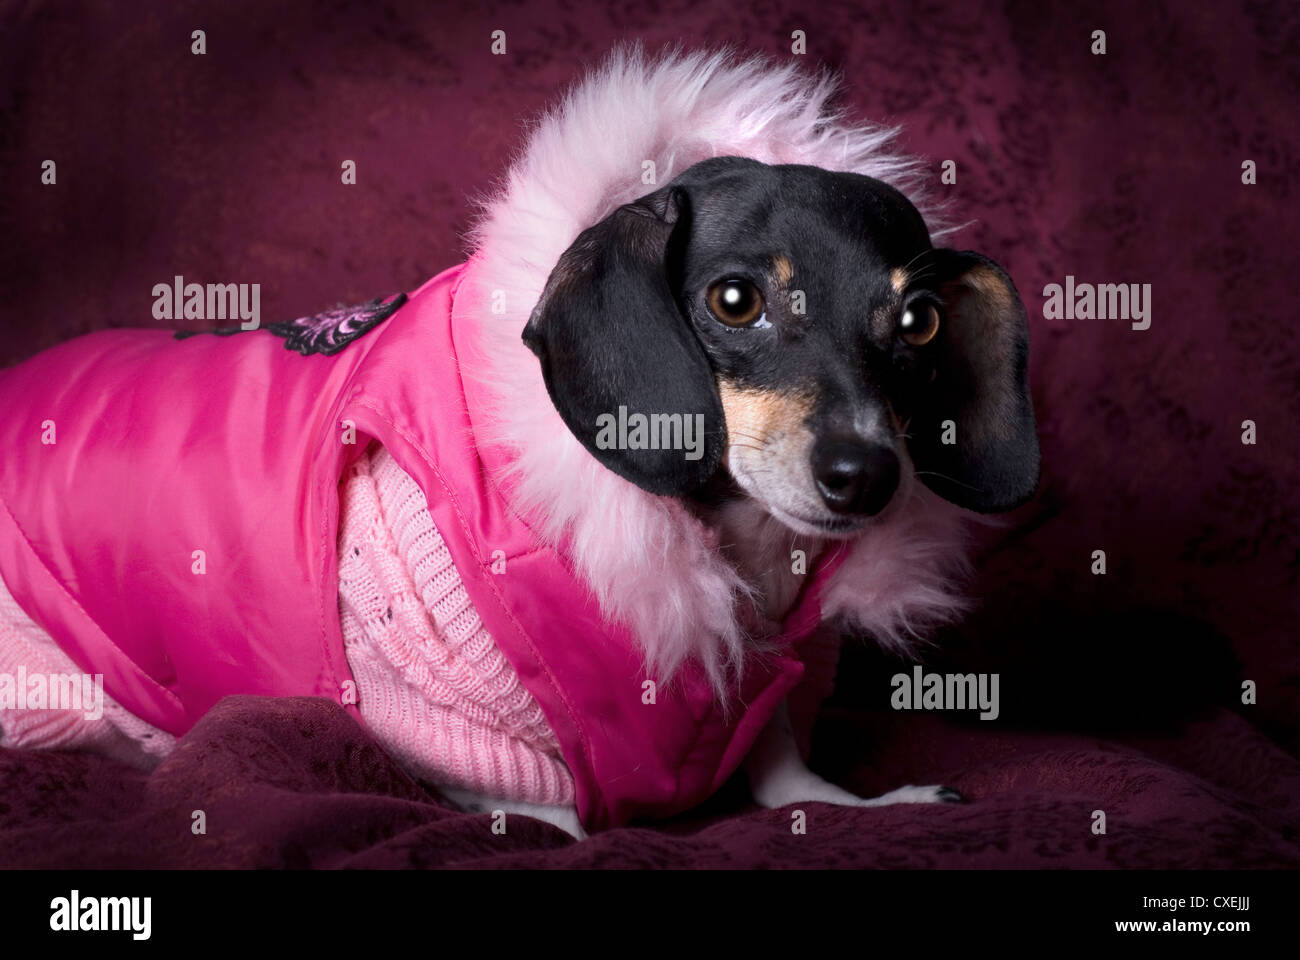 Close up horizontal studio shot of a black and tan Dachshund wearing a pink sweater and coat. Stock Photo